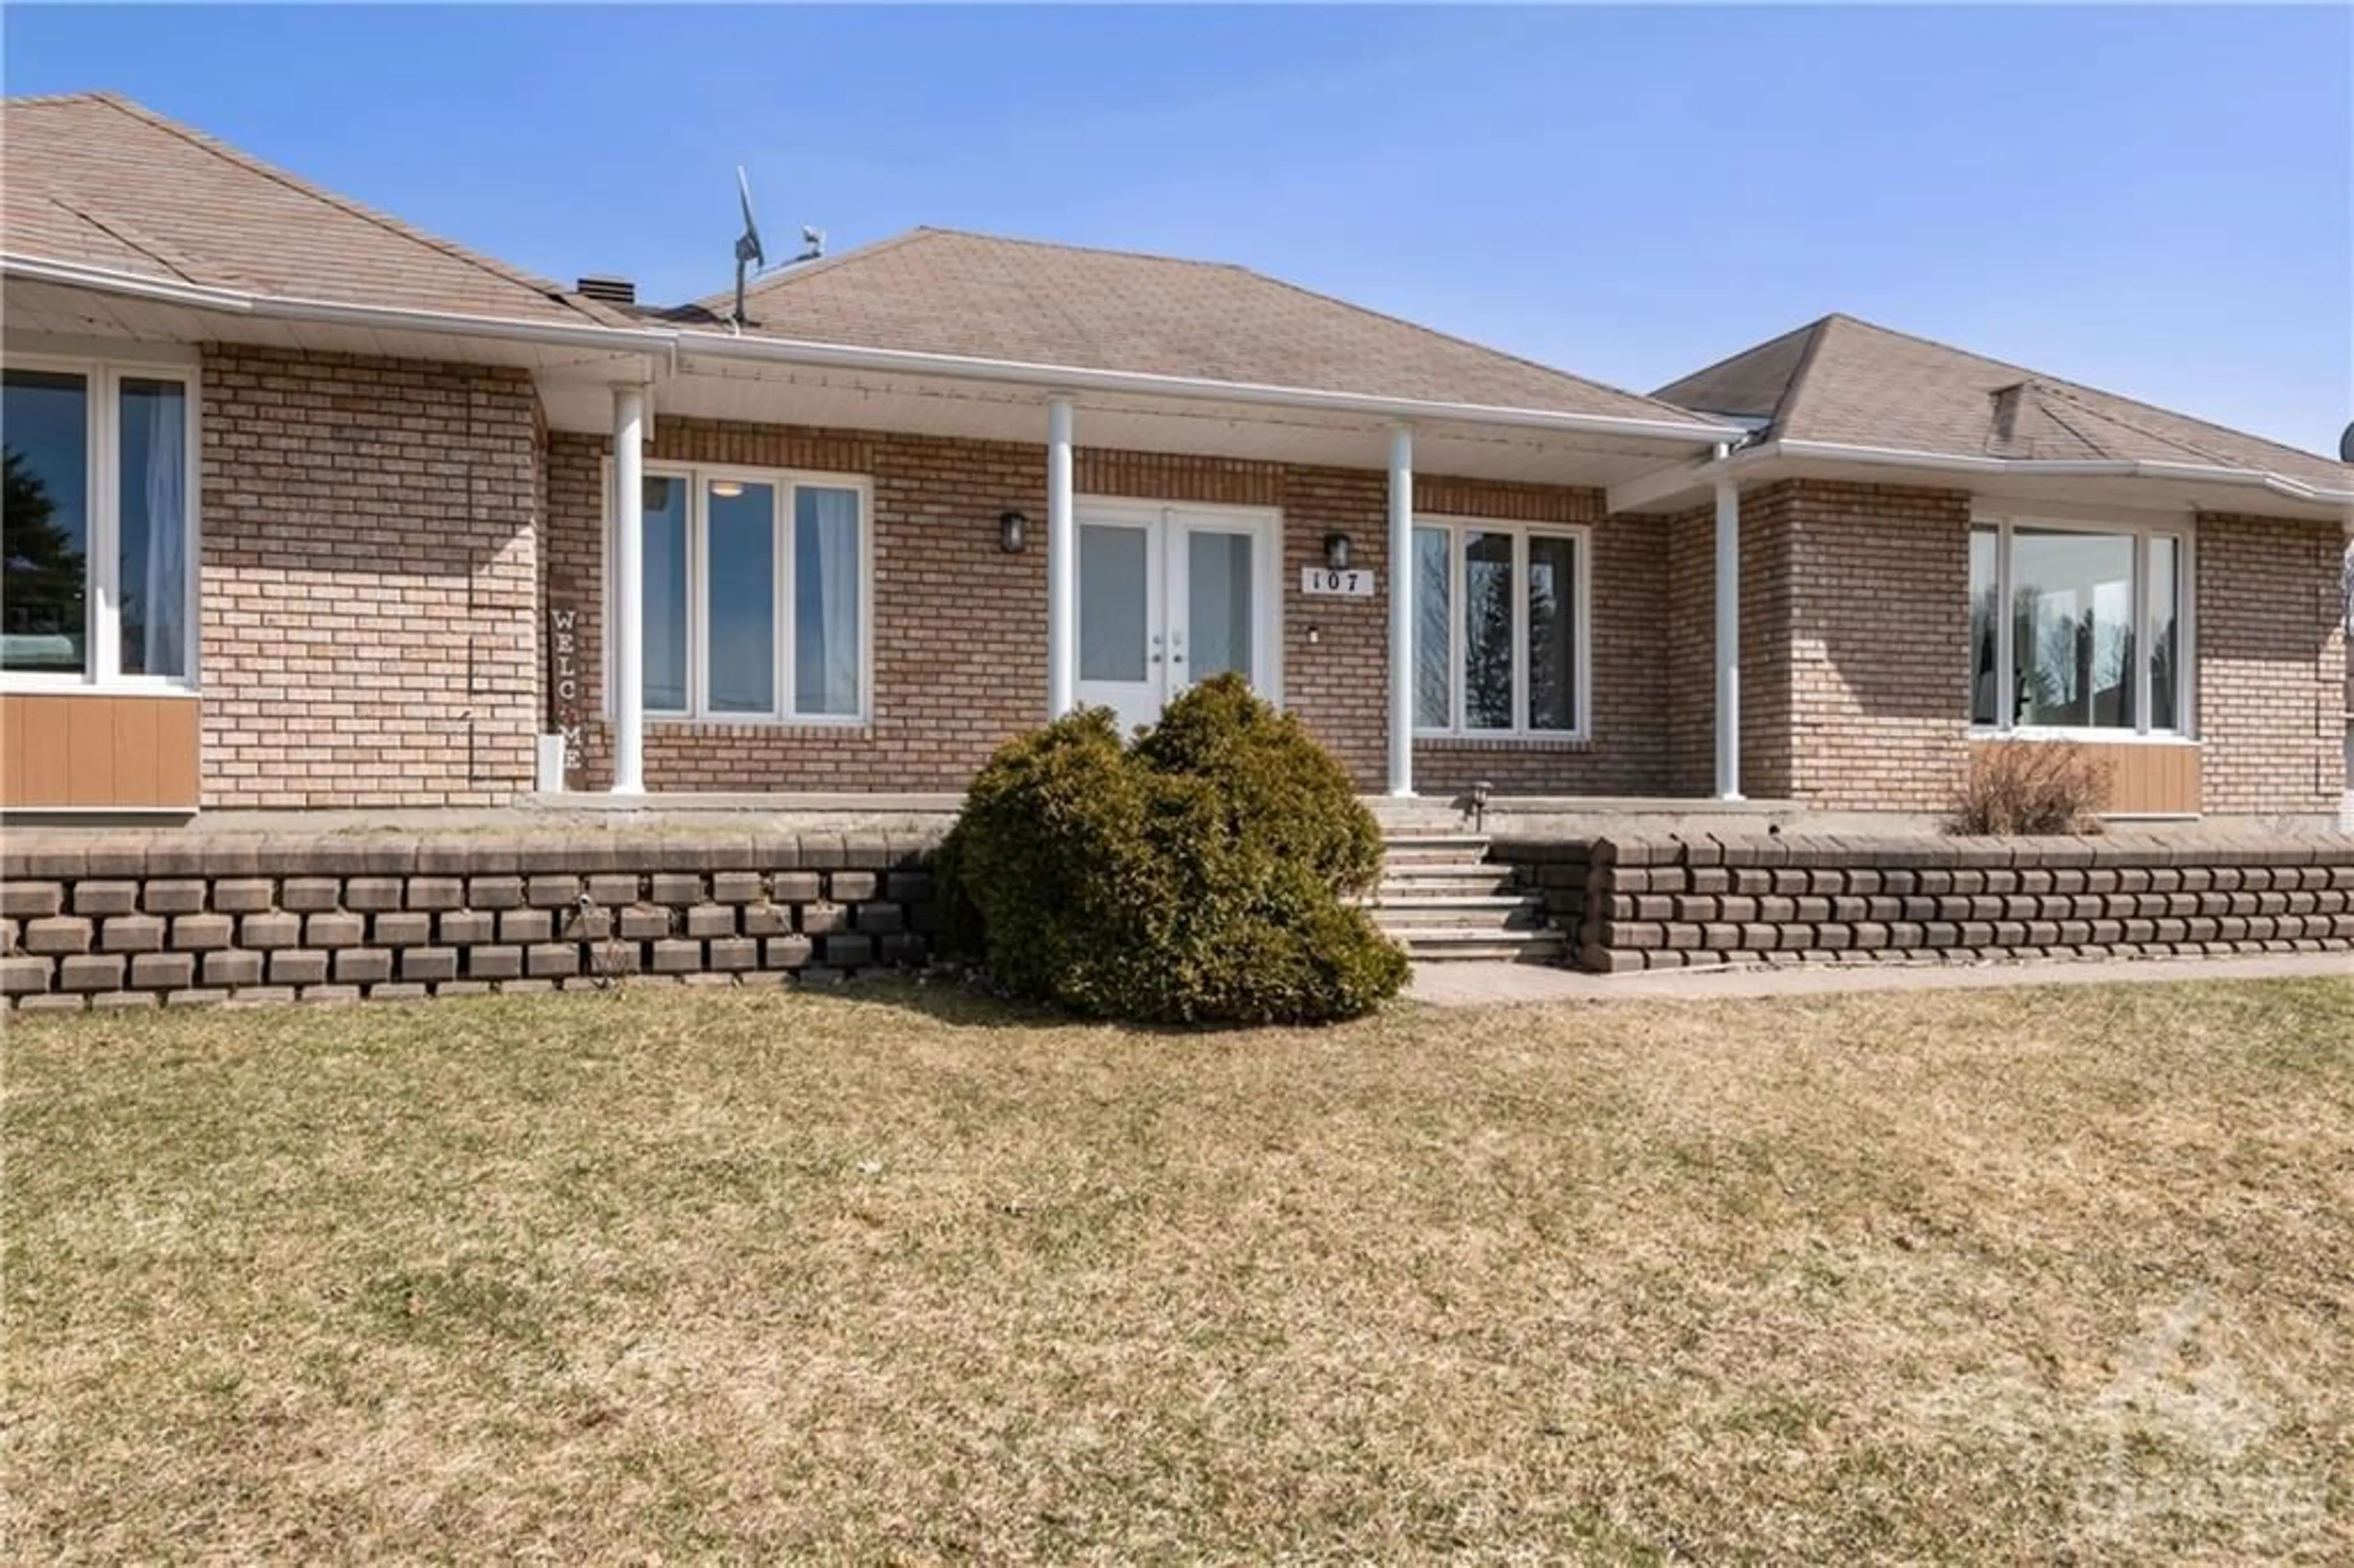 Home with brick exterior material for 107 BOURDEAU Blvd, Limoges Ontario K0A 2M0